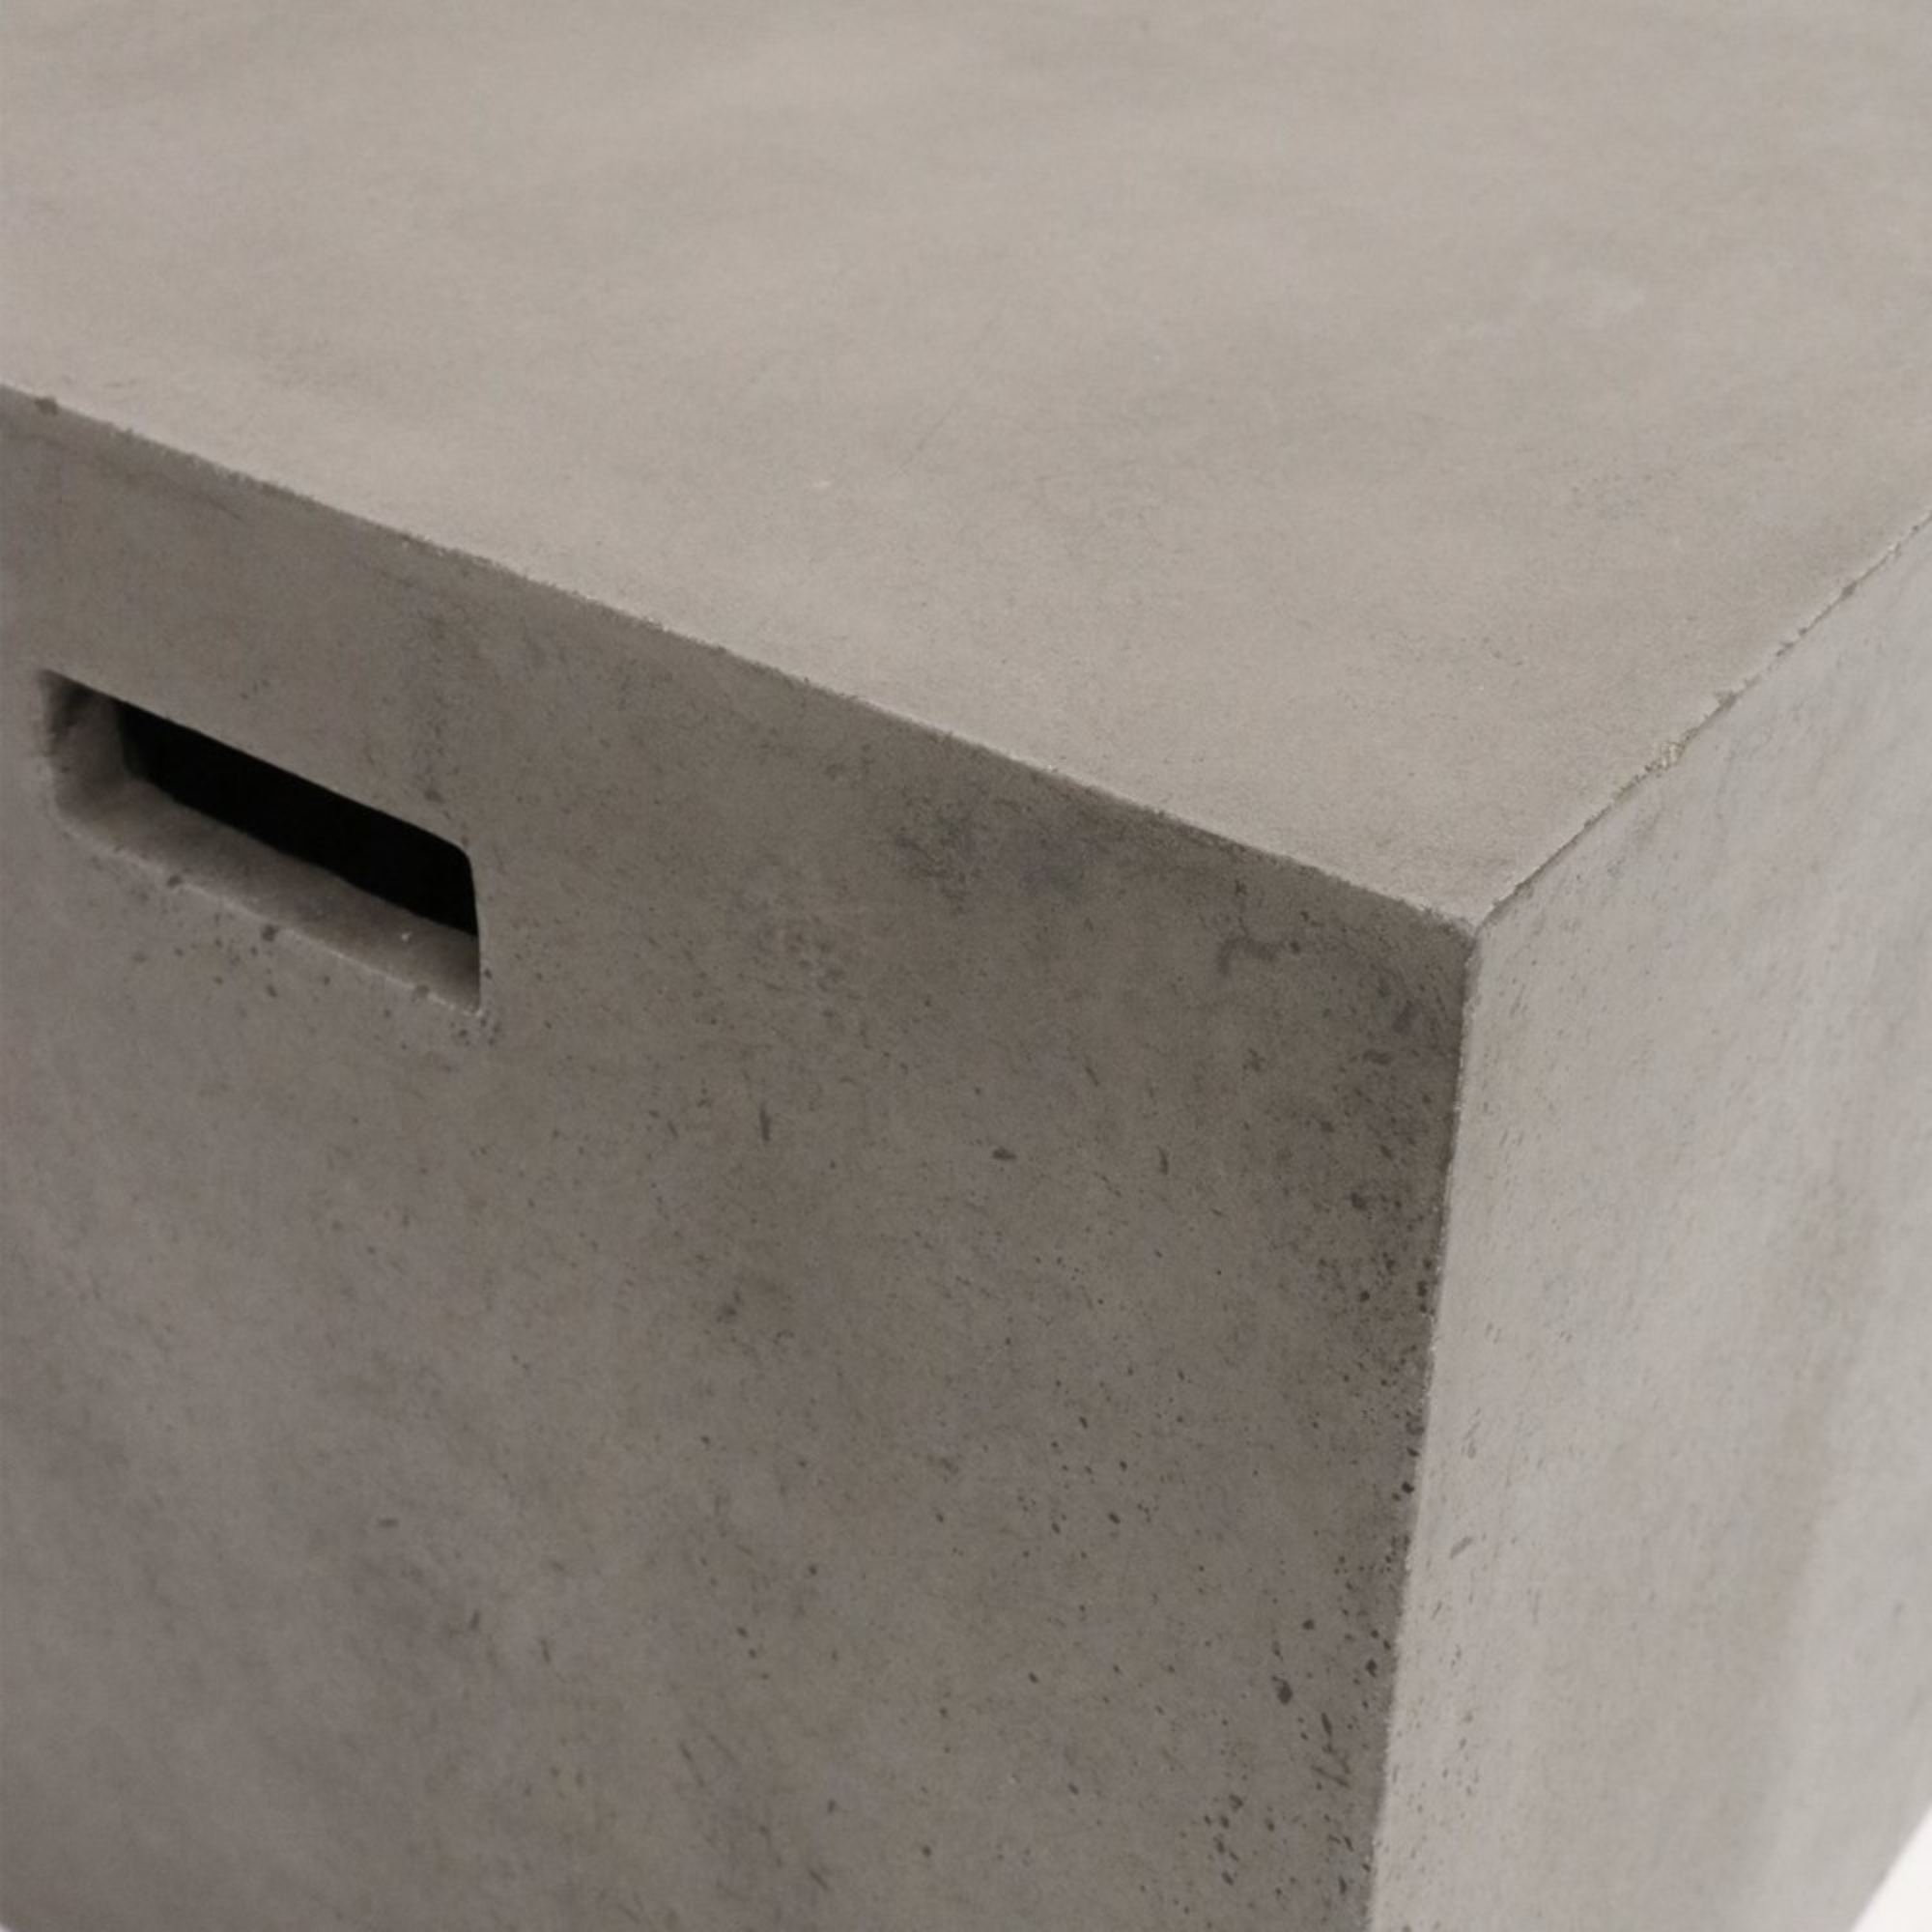 CONCRETE RECTANGLE SIDE TABLE | STOOL